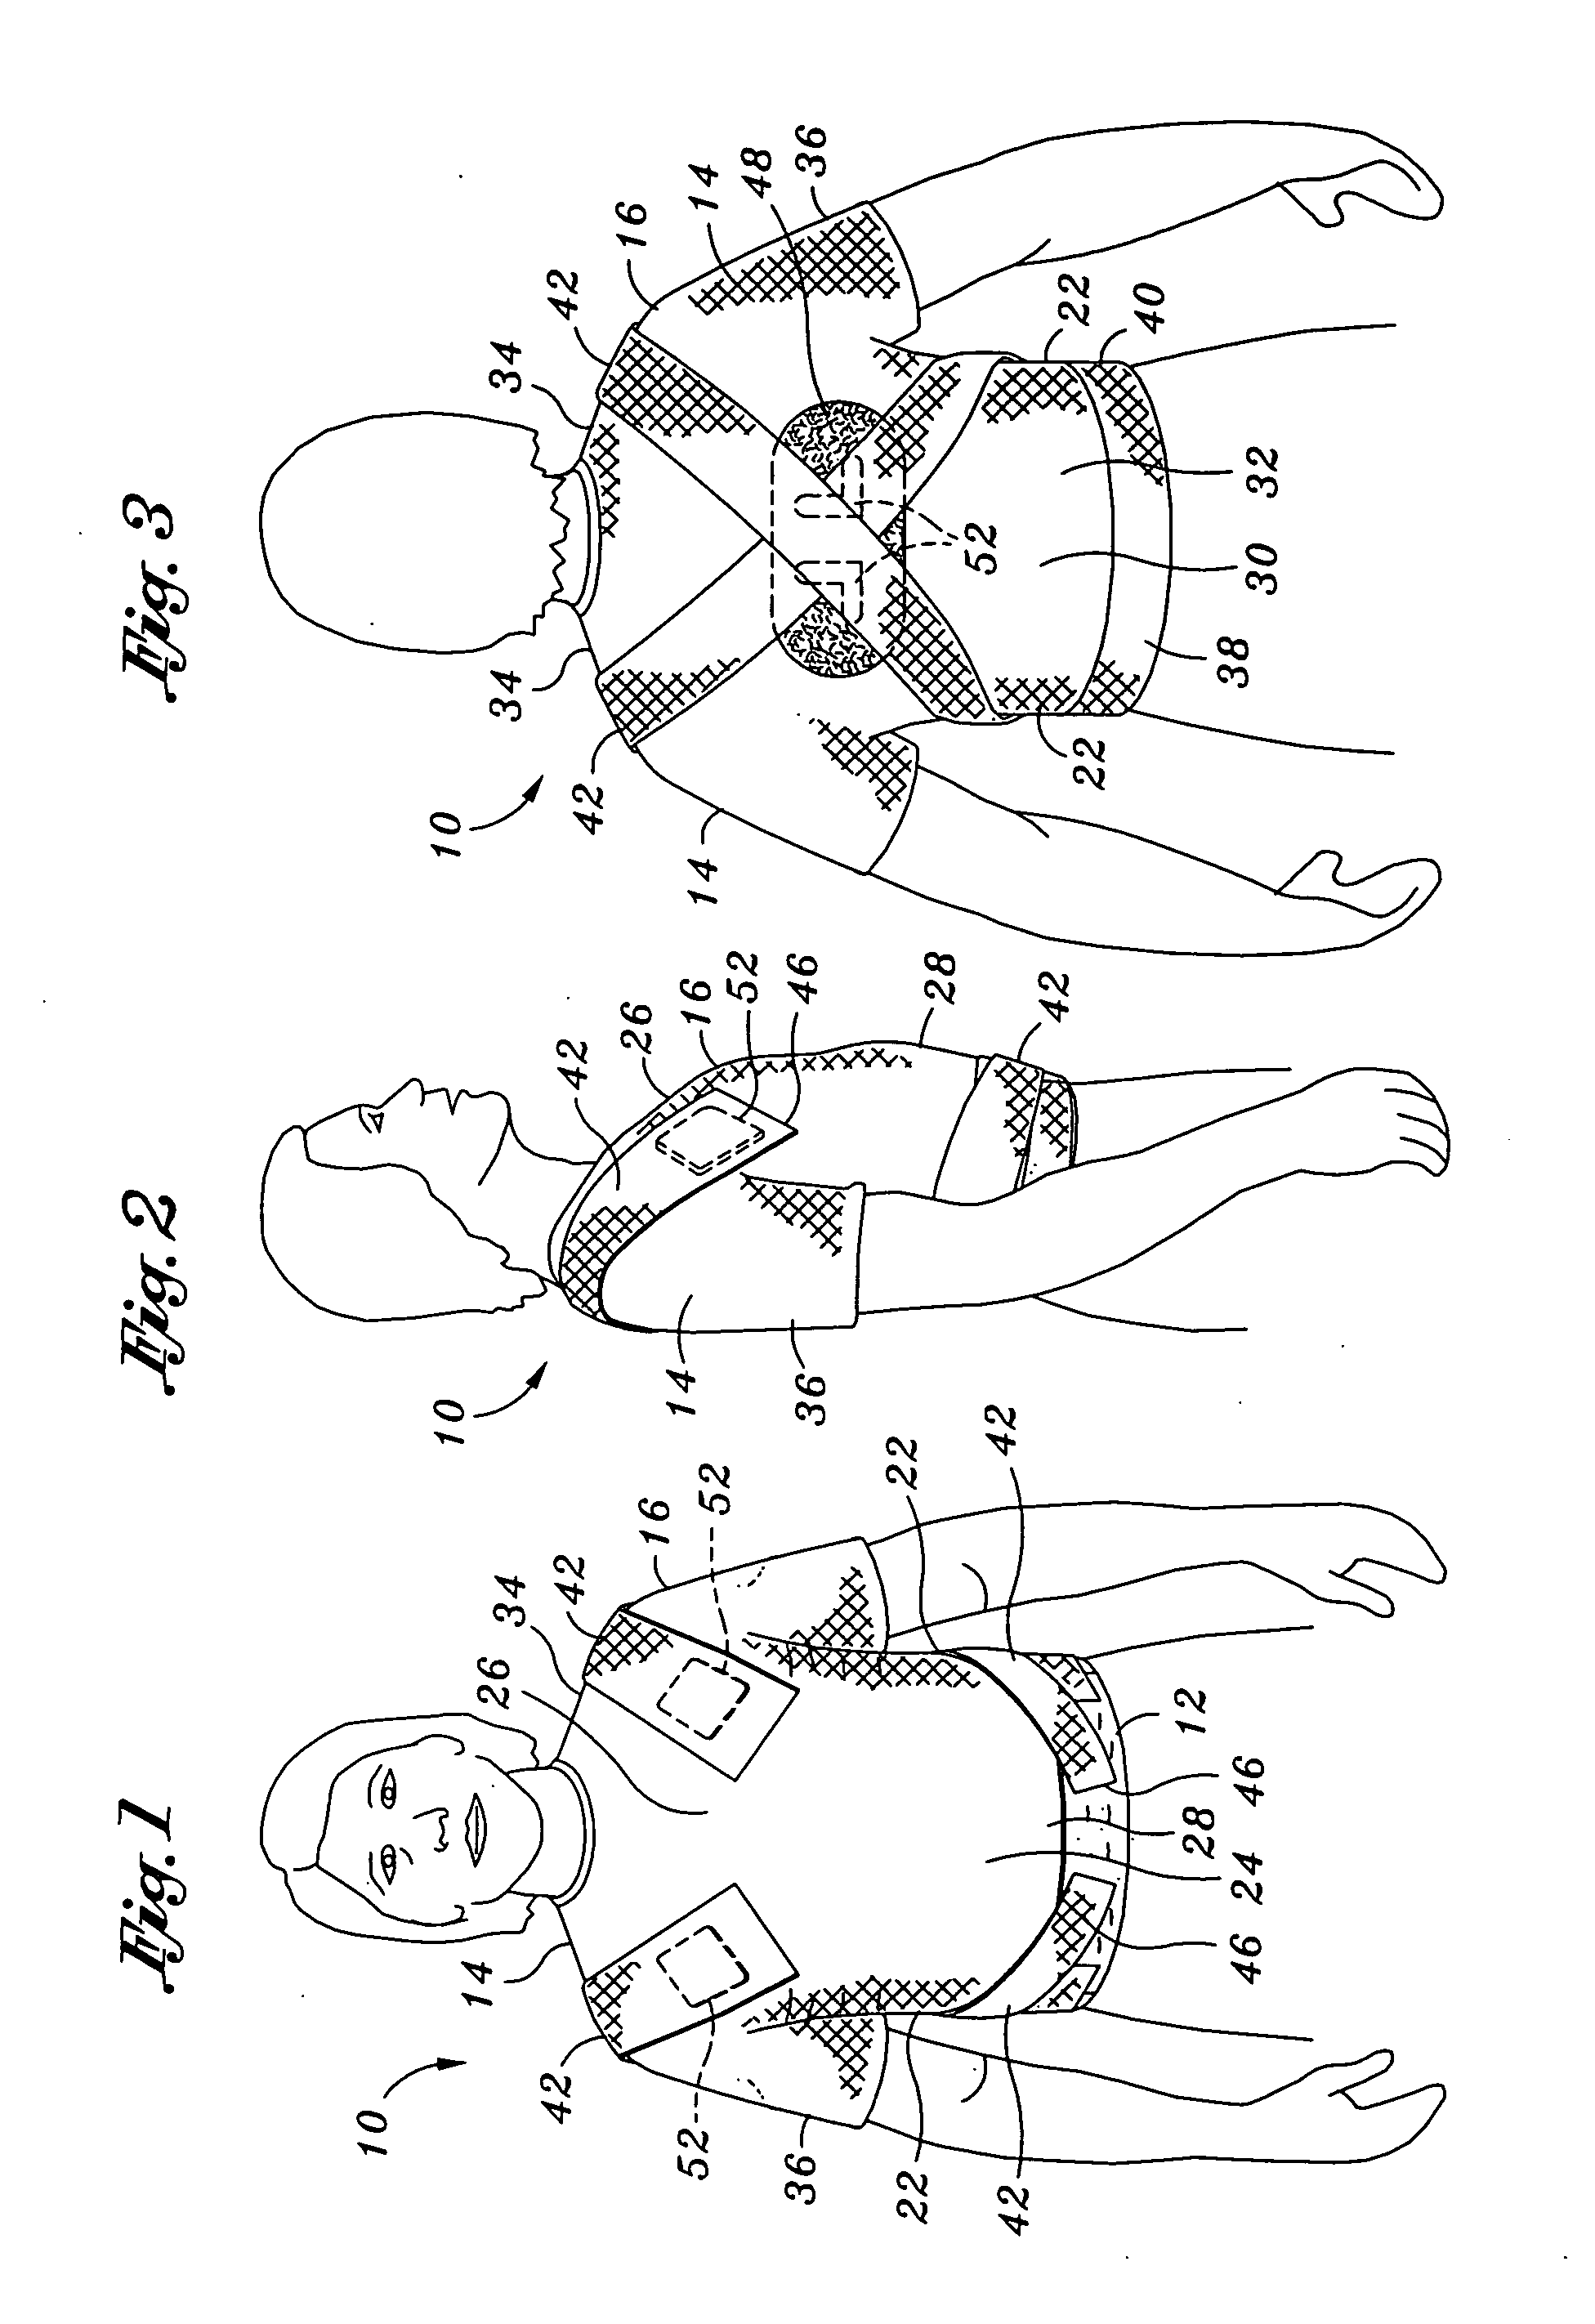 Posture improvement device and method of use